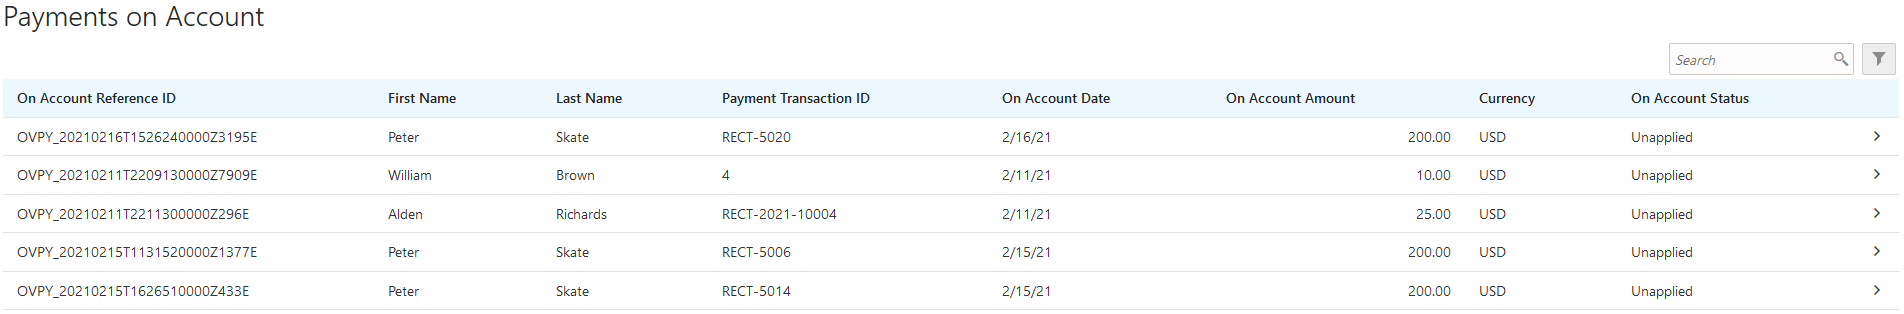 Example of the Payments on Account page